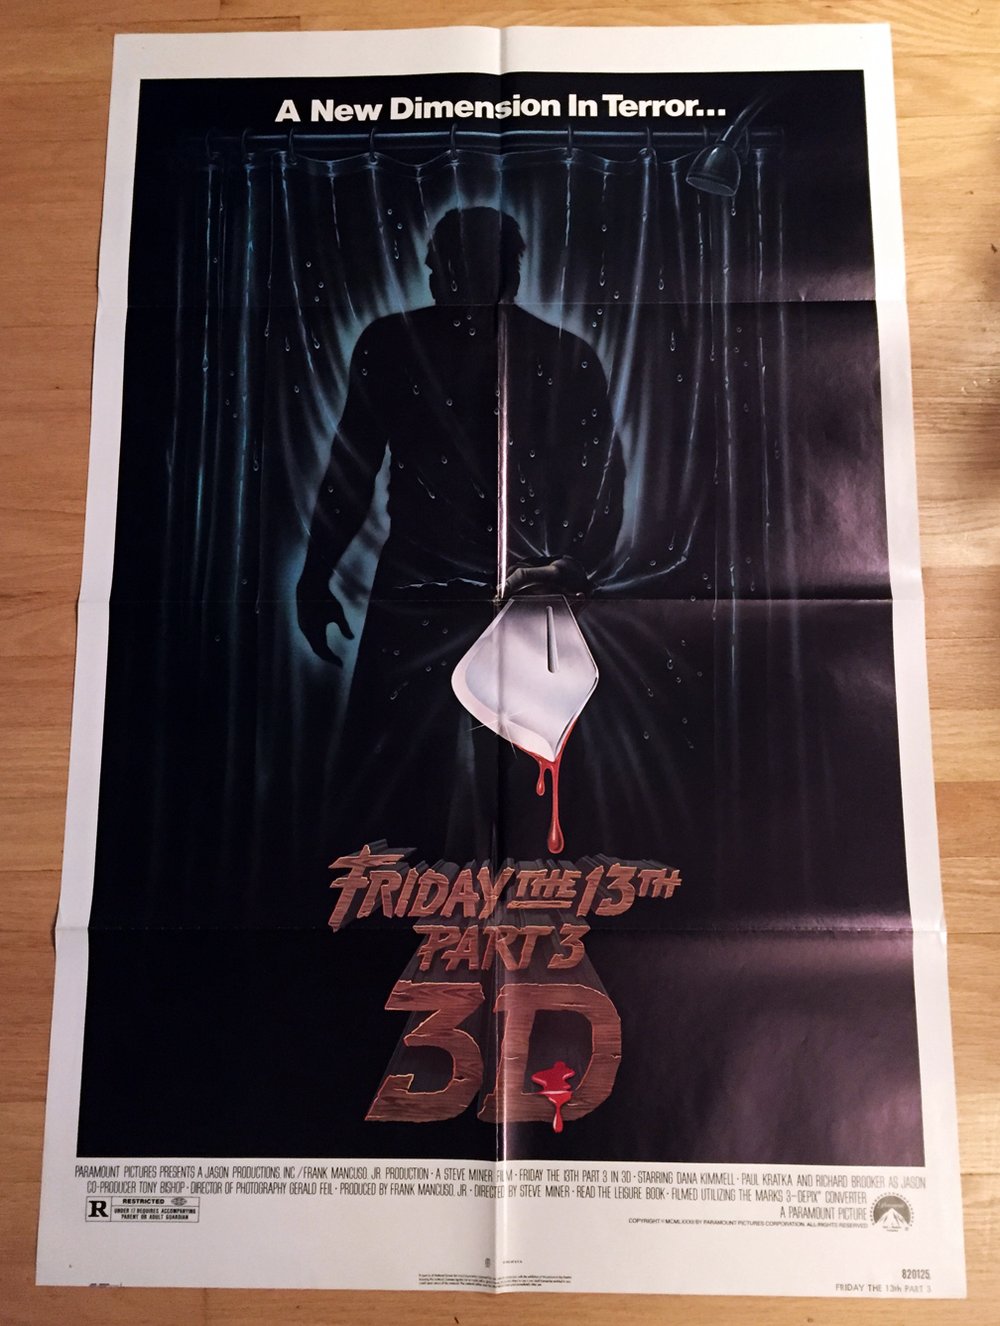 1982 FRIDAY THE 13TH PART III Original U.S. One Sheet Movie Poster